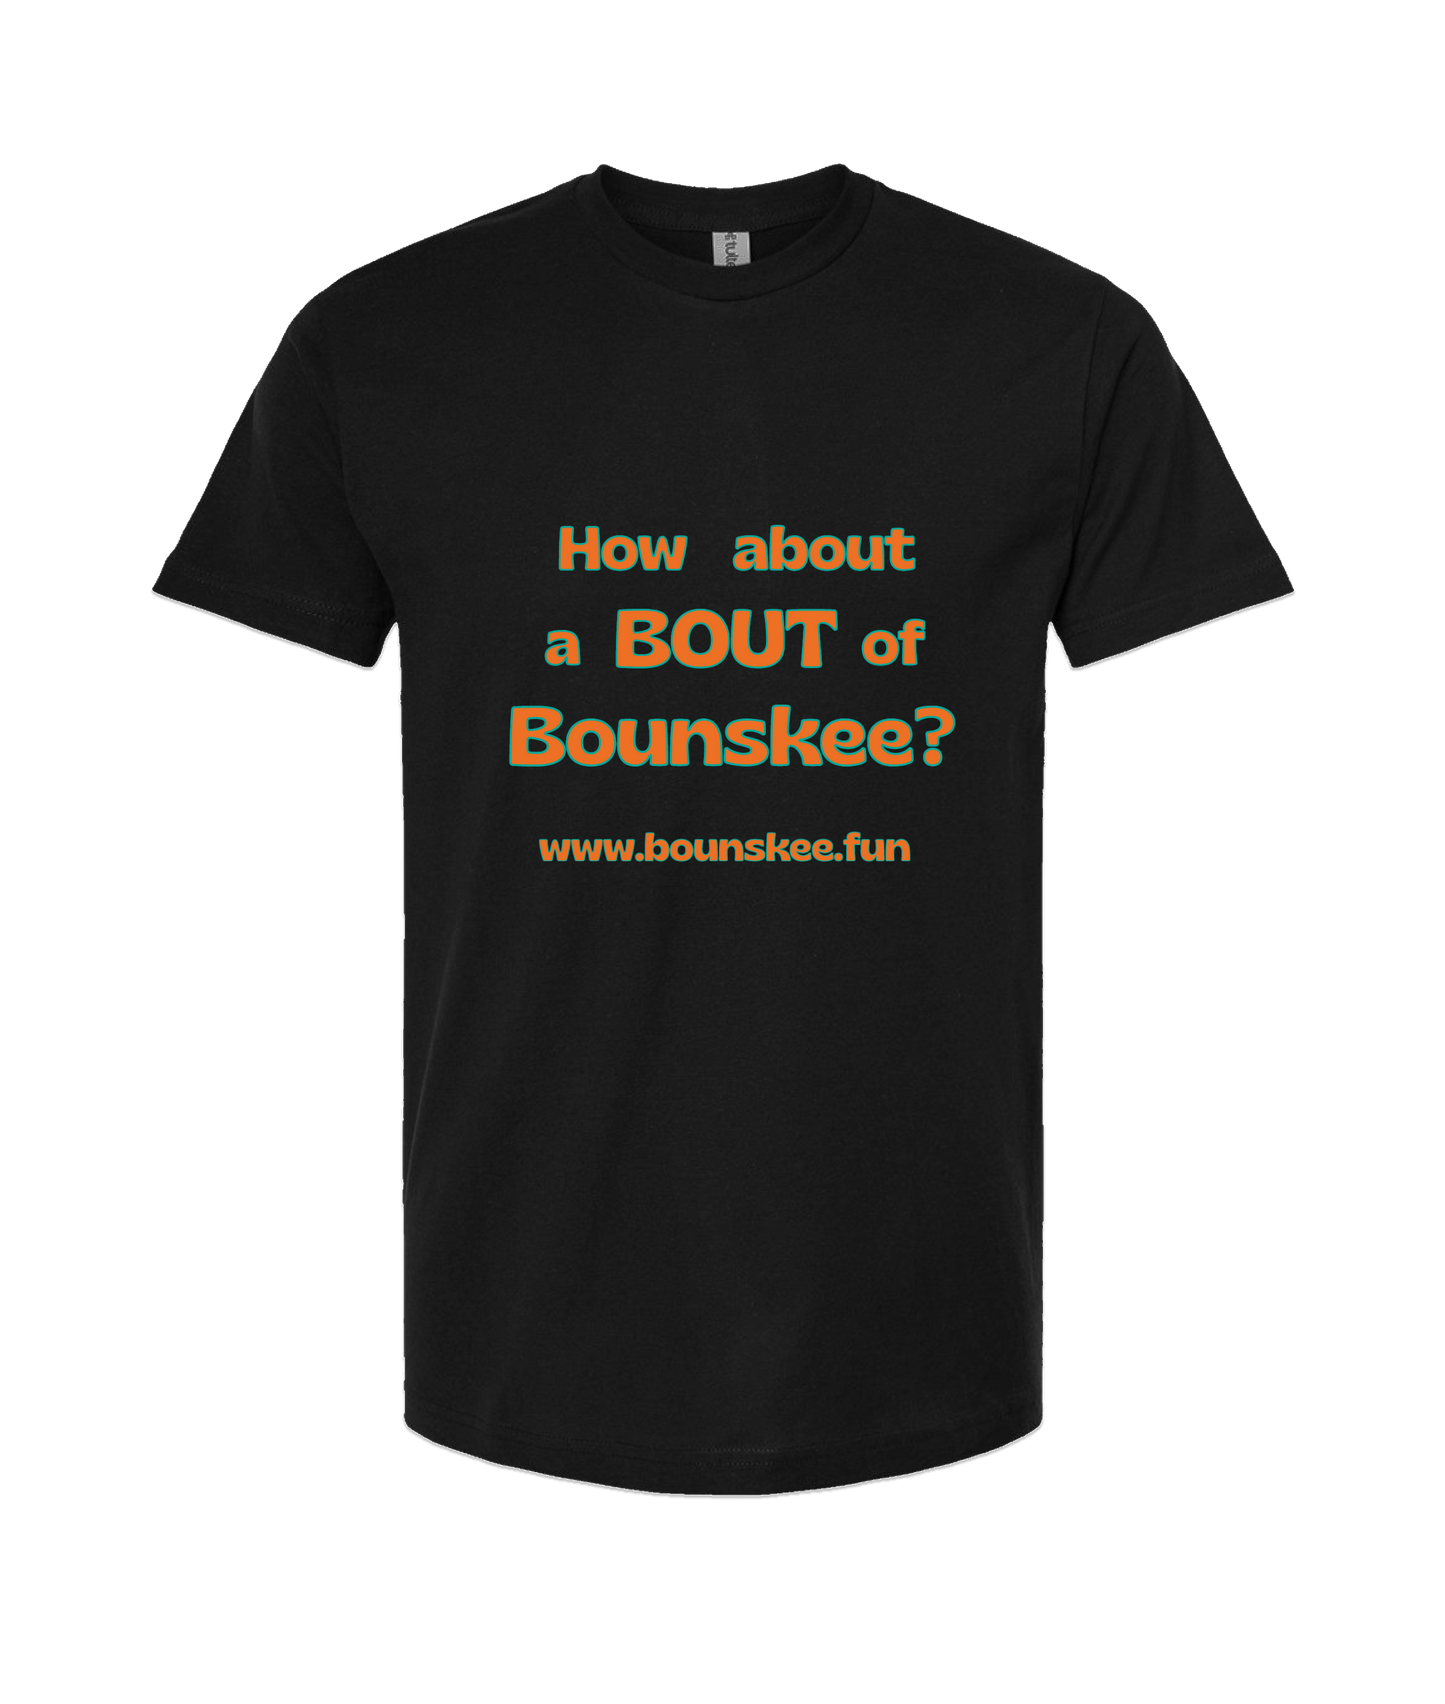 Bounskee - How About A Bout - Black T Shirt